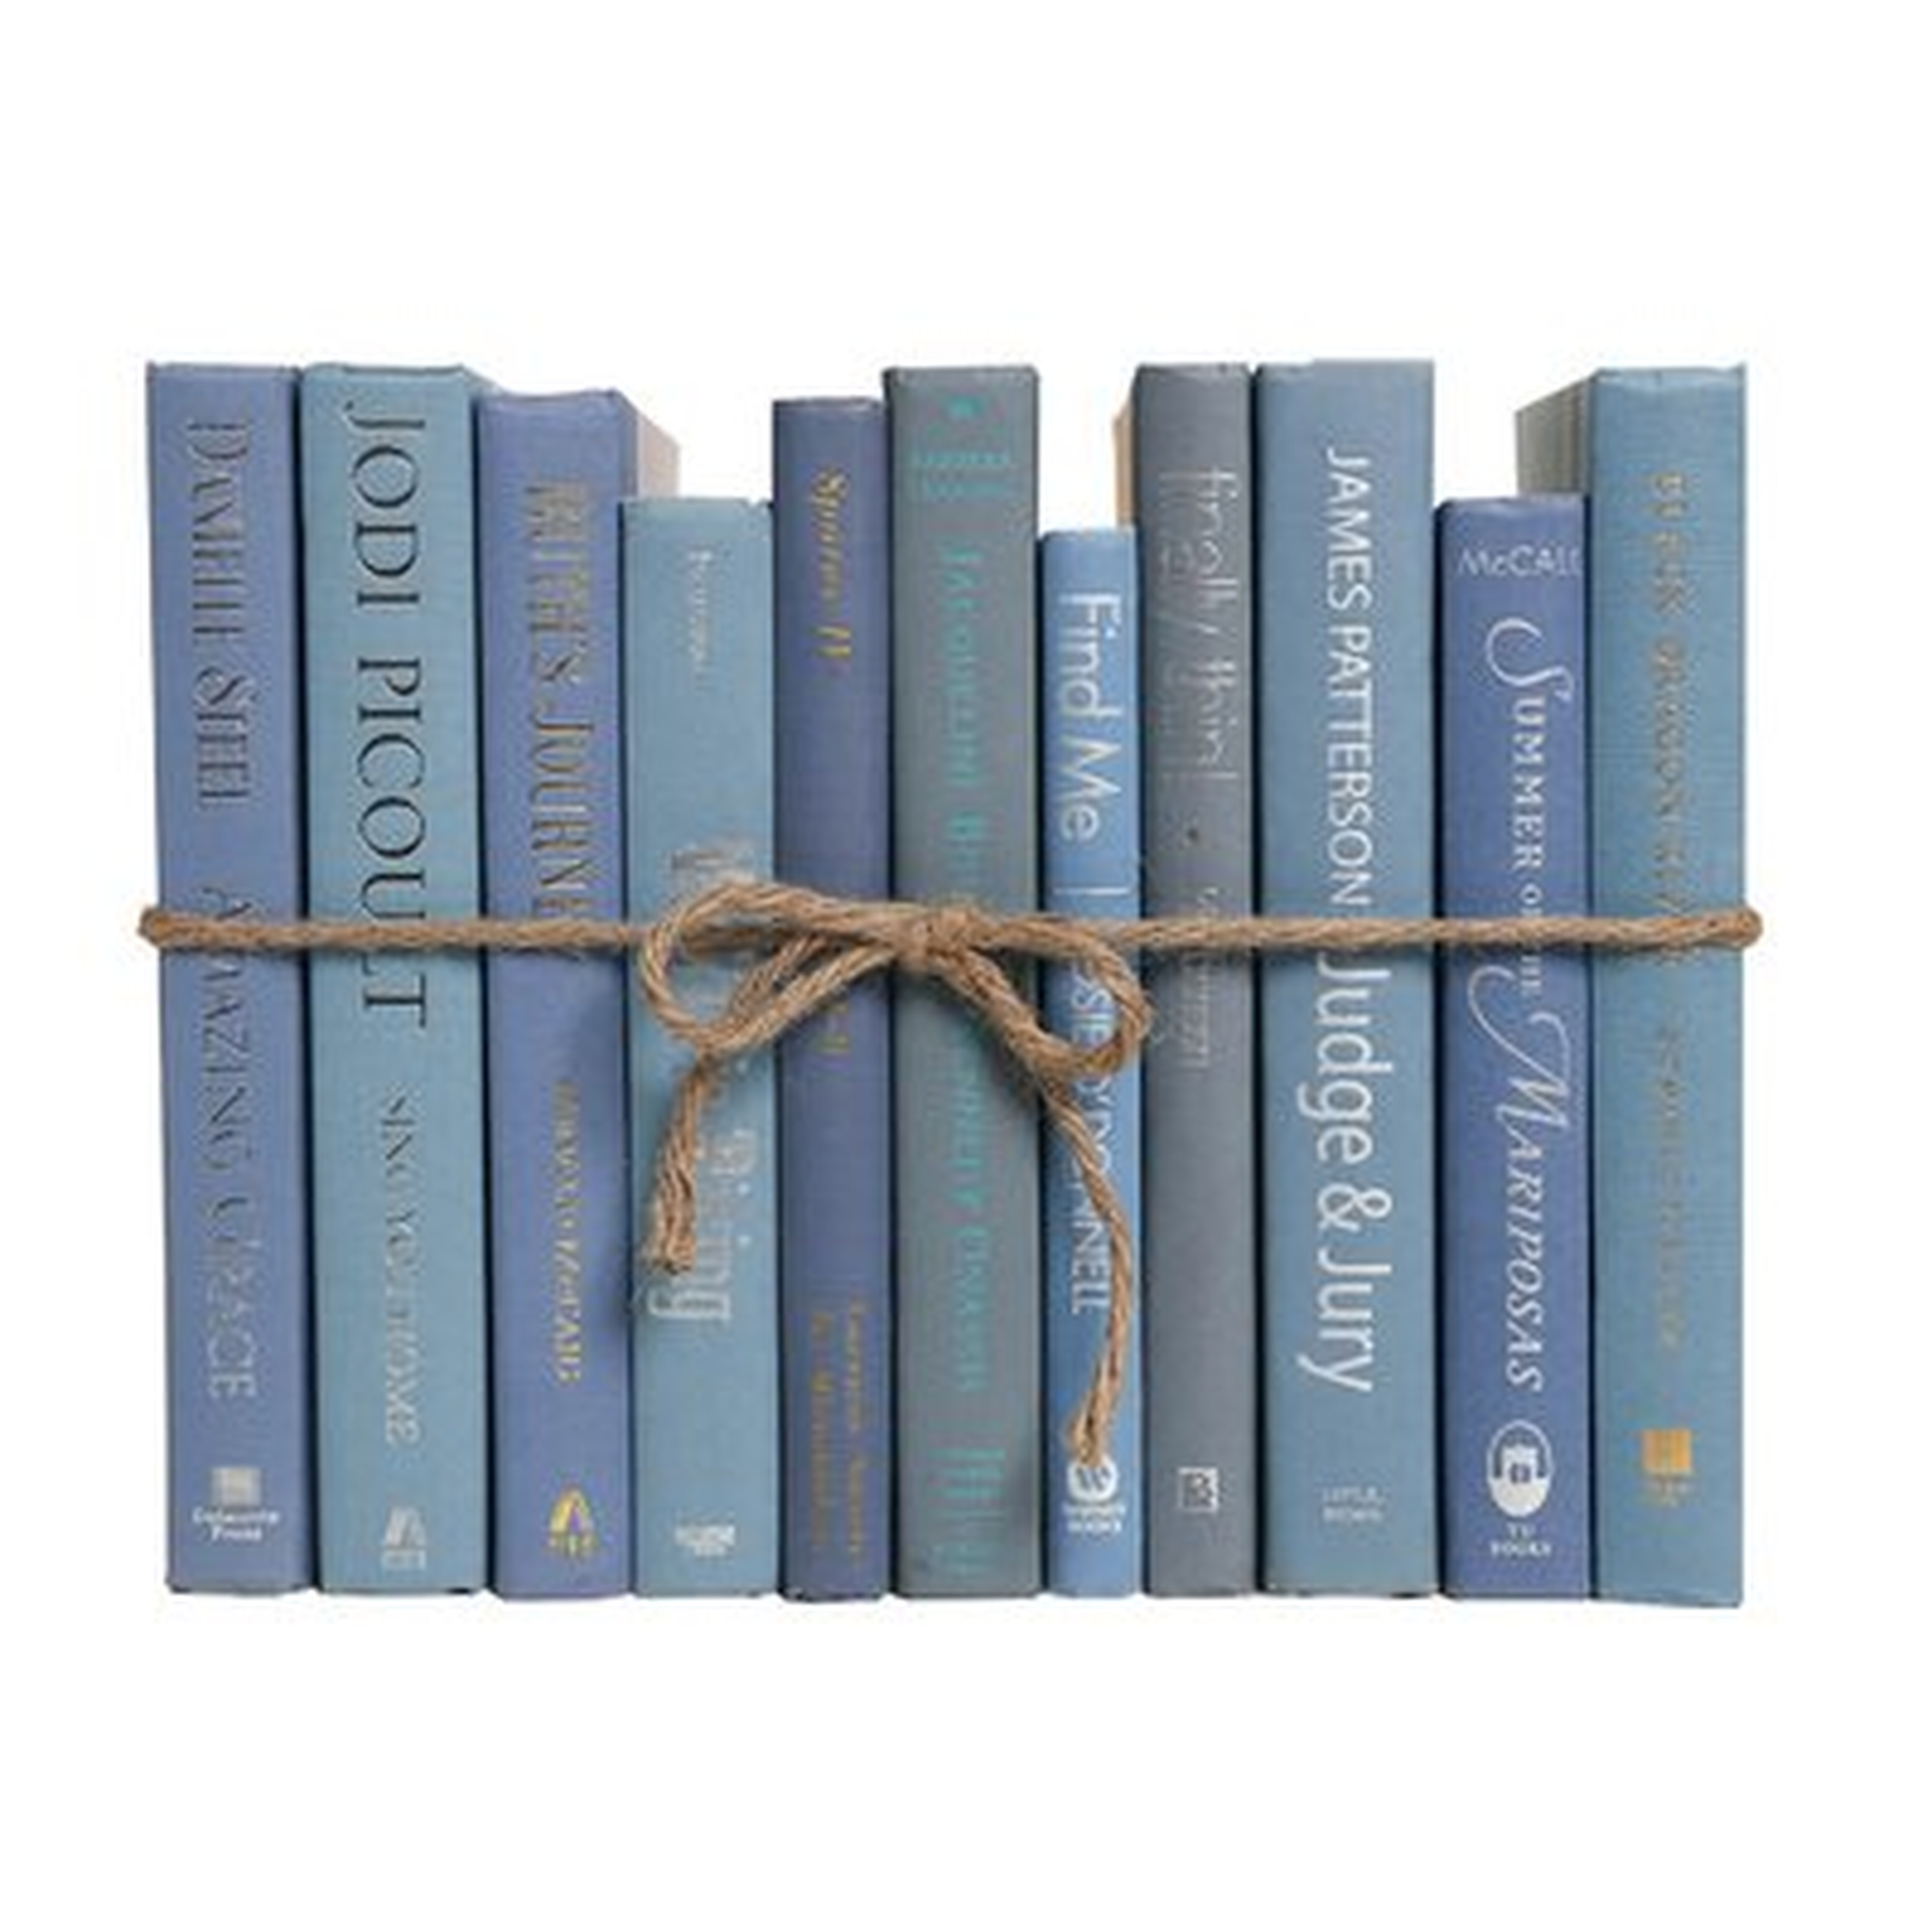 Authentic Decorative Books - By Color Modern Marlin ColorPak (1 Linear Foot, 10-12 Books) - Wayfair